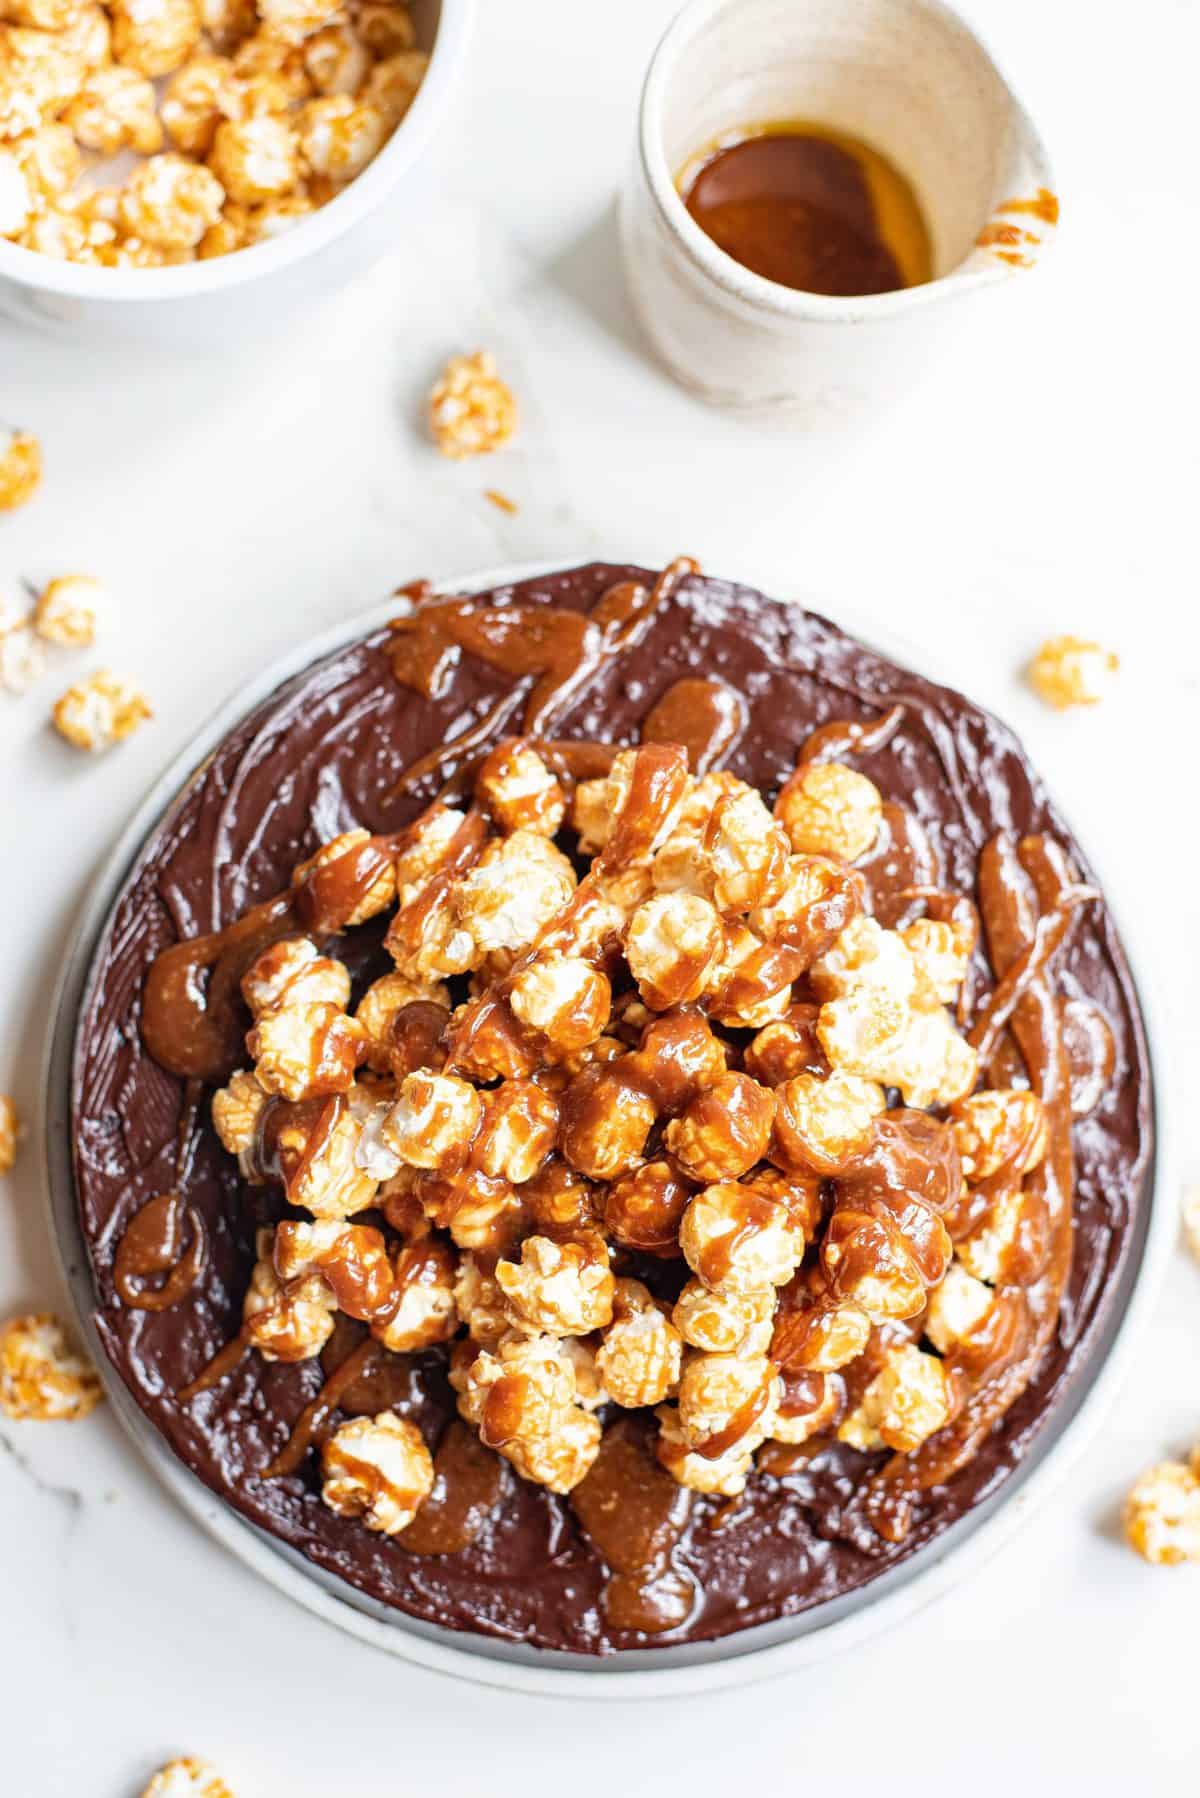 chocolate cake with caramel corn on top on white plate